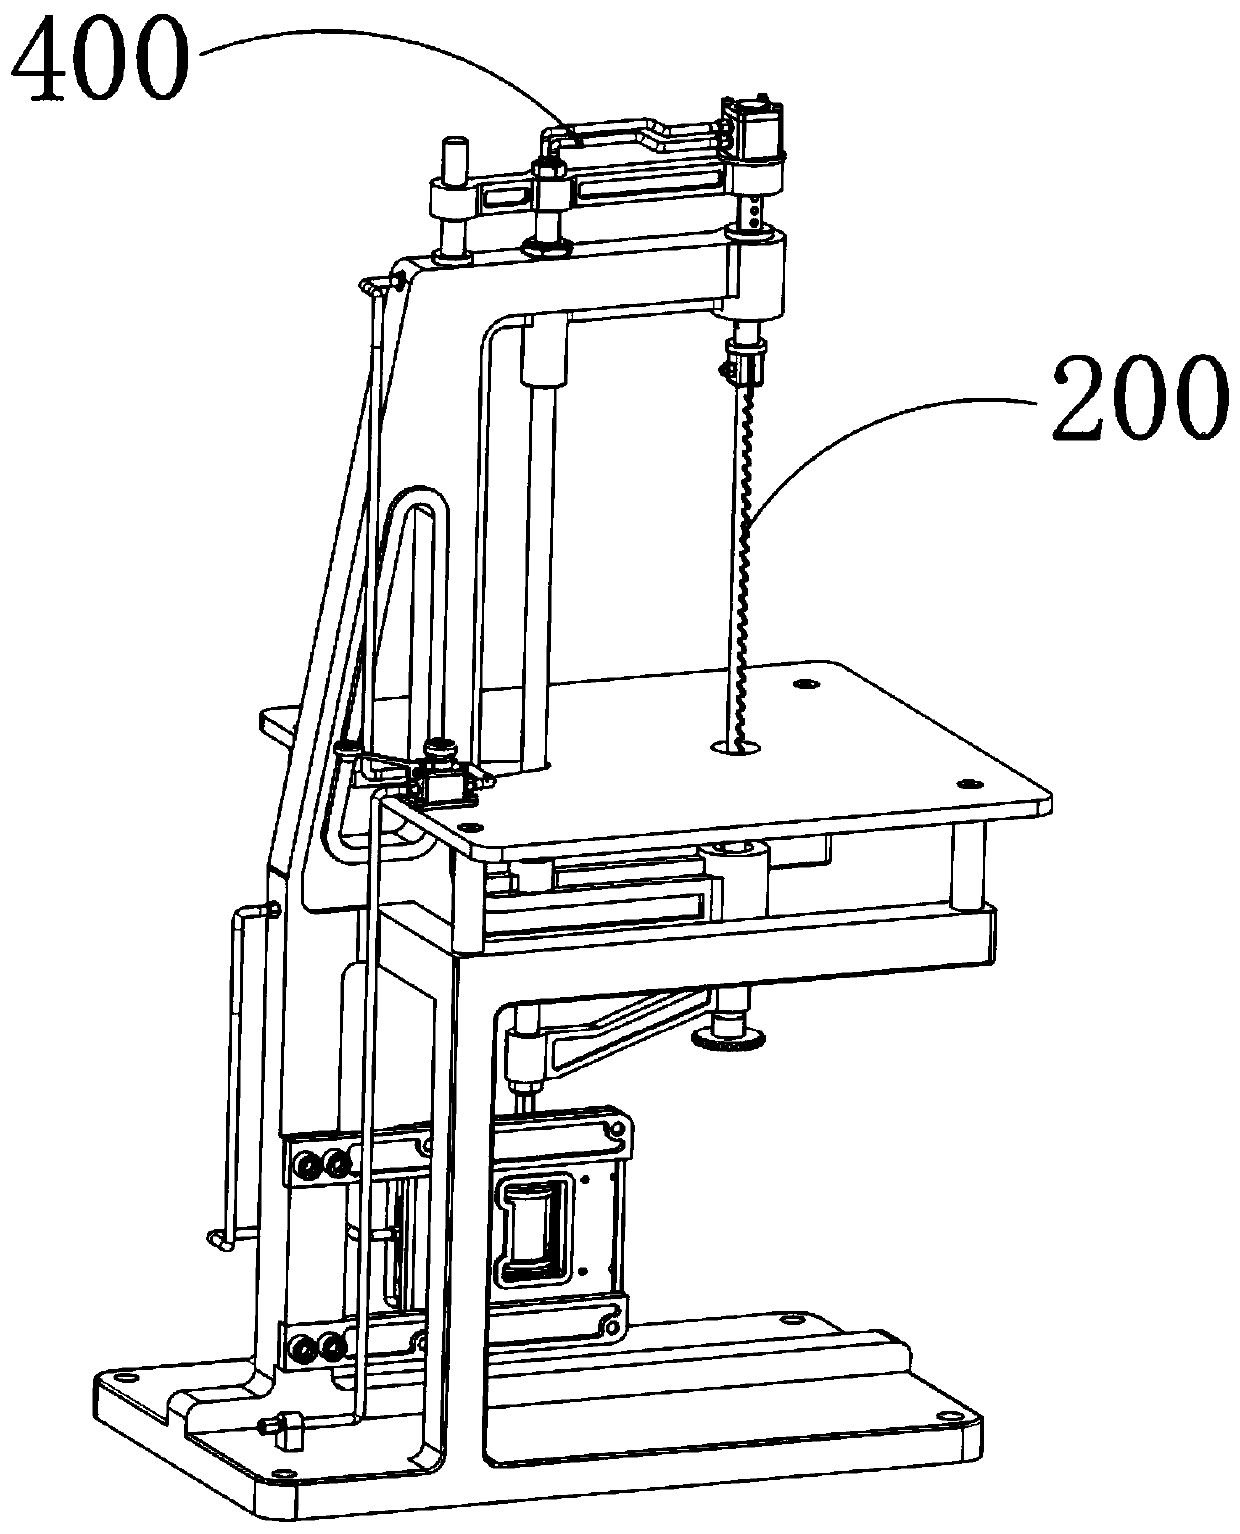 A multi-level protection pneumatic reciprocating saw